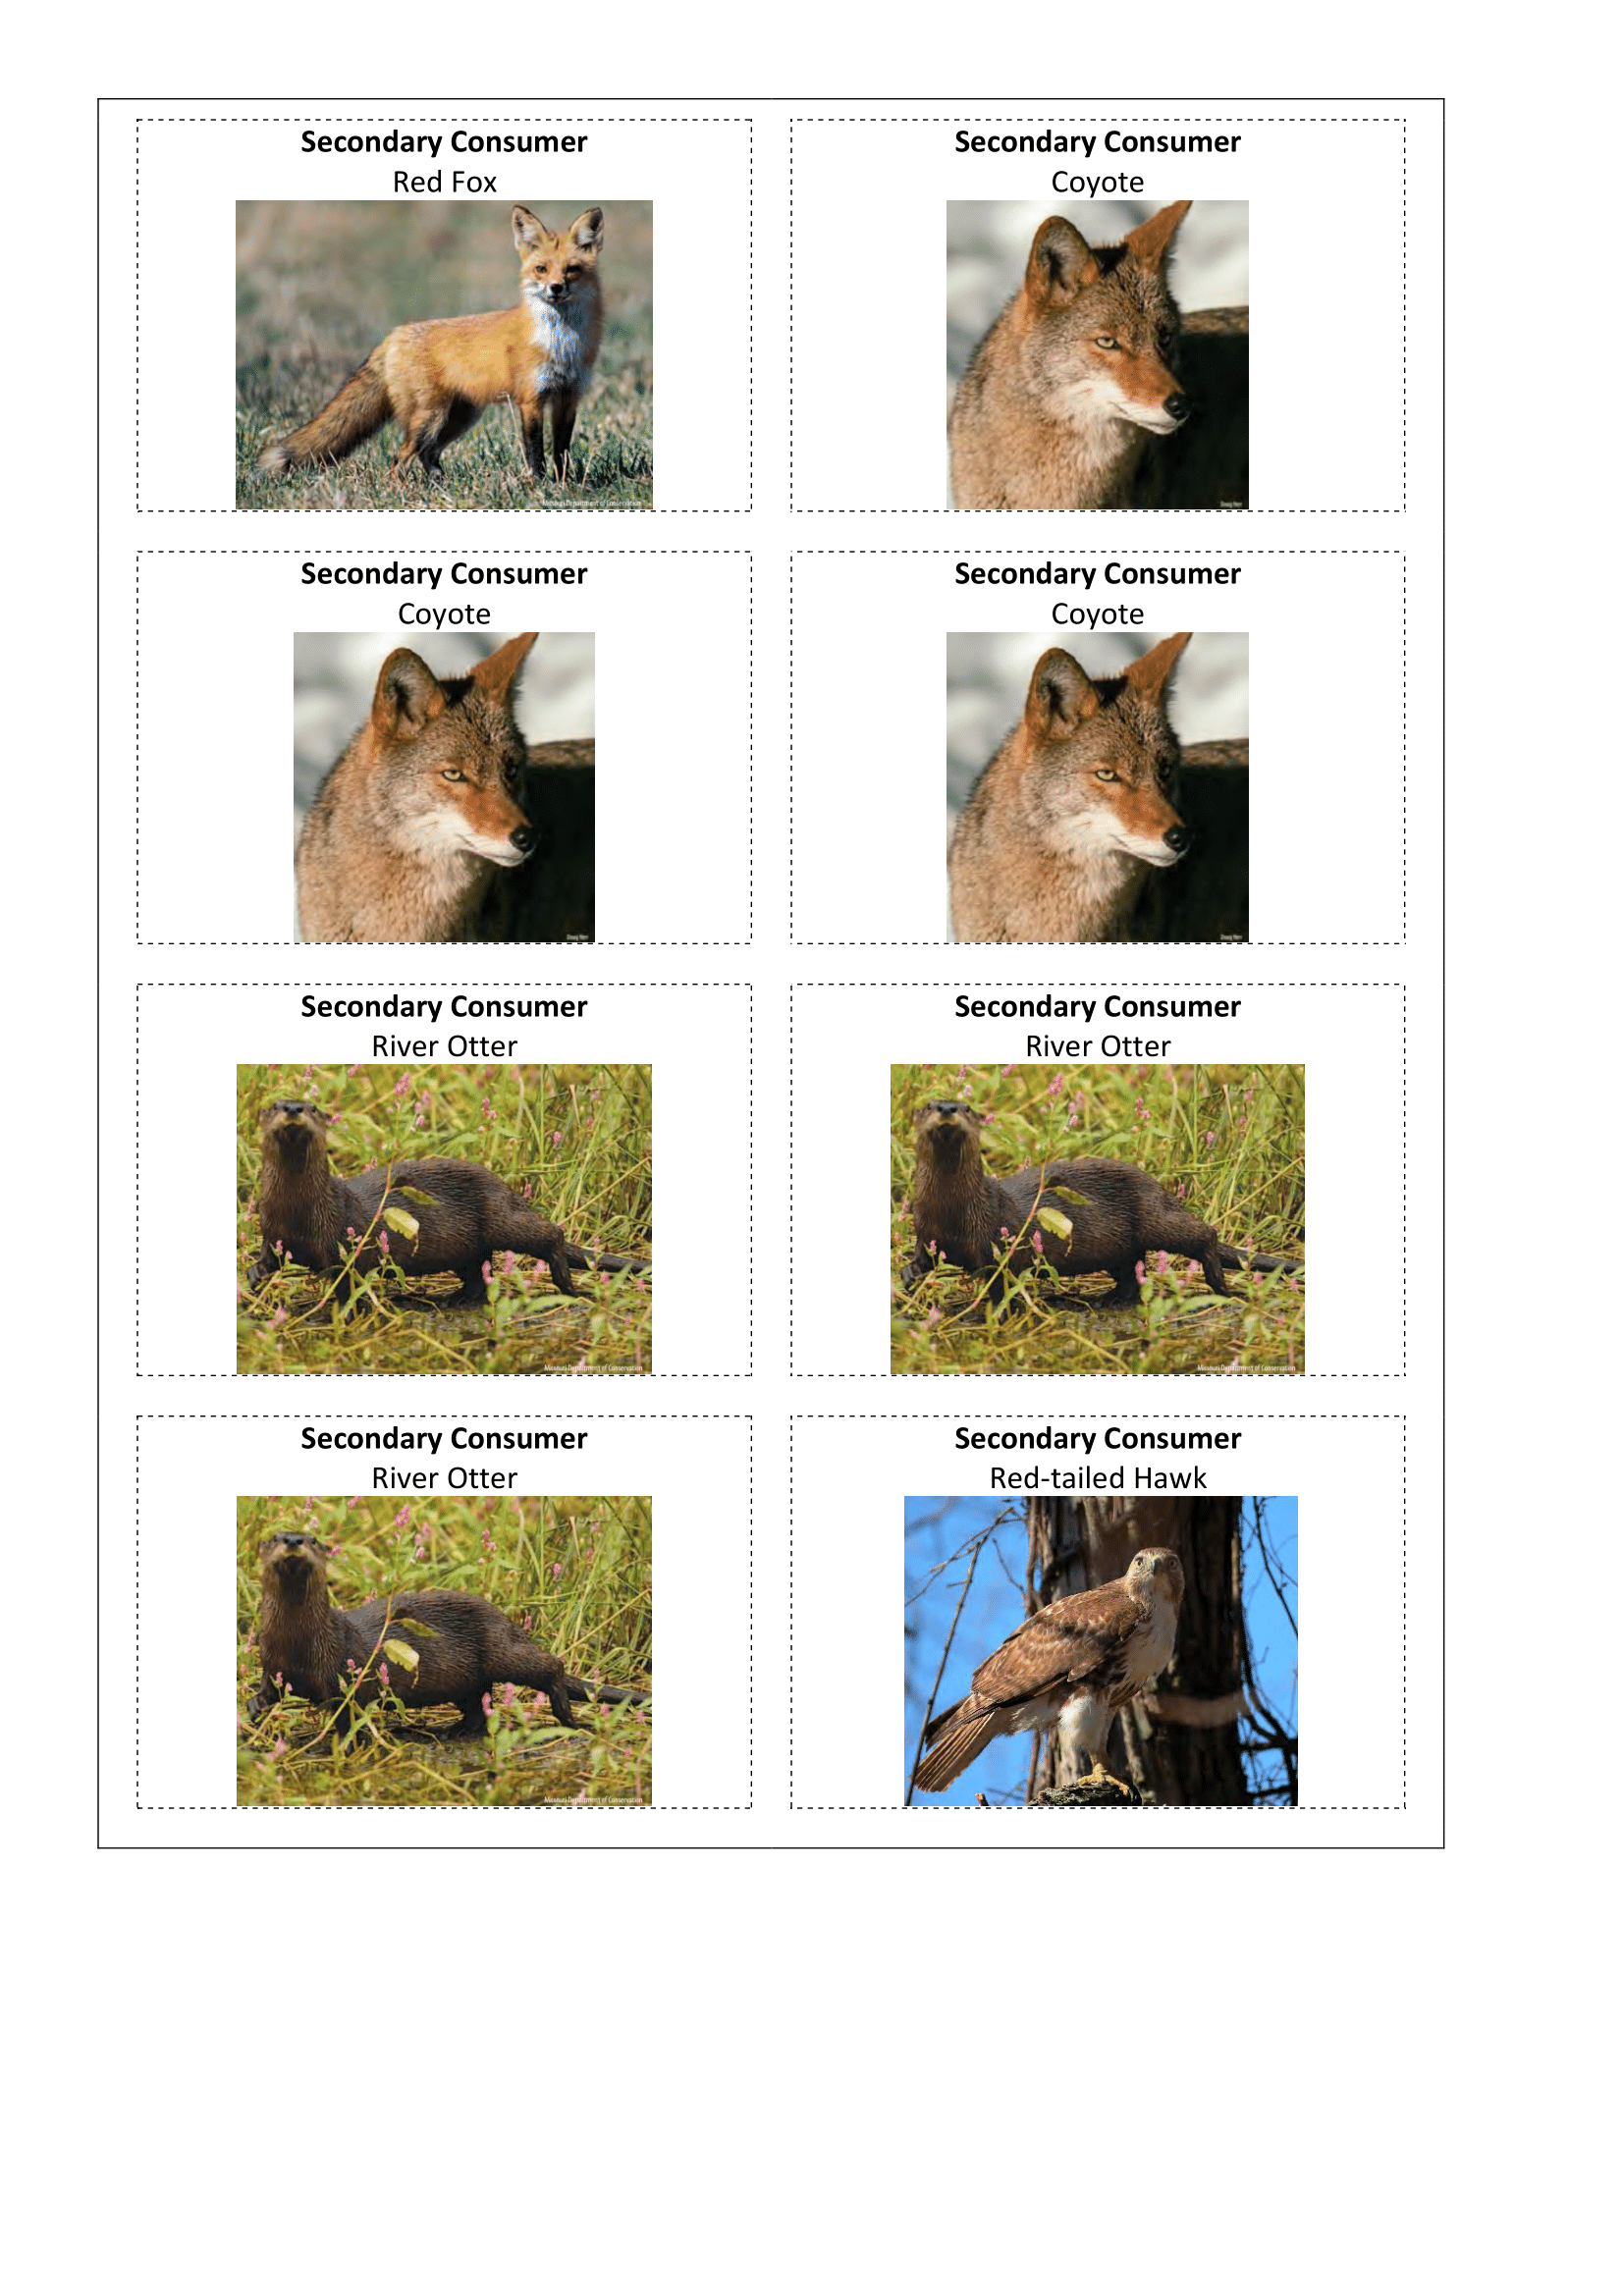 Images, Primary Consumer red fox, coyote, and river otter.